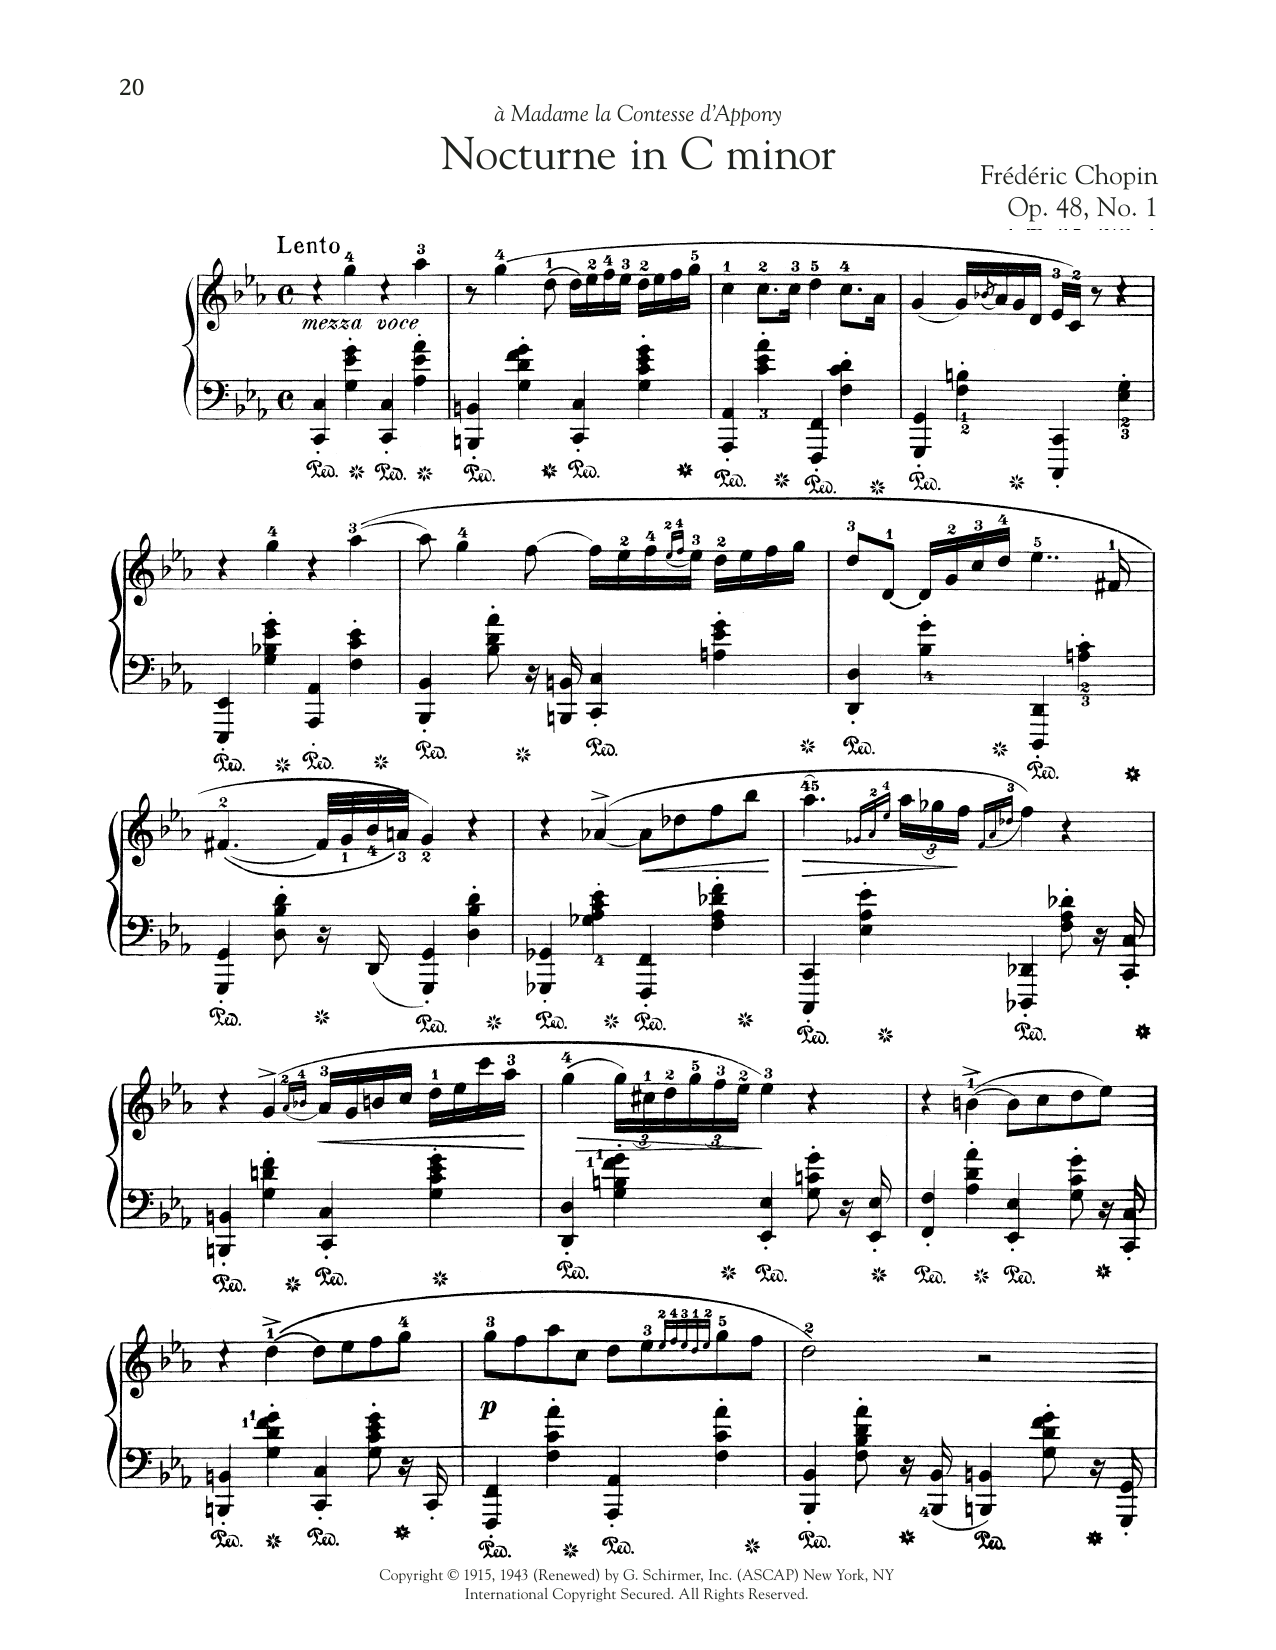 Download Frederic Chopin Nocturne, Op. 48, No. 1 Sheet Music